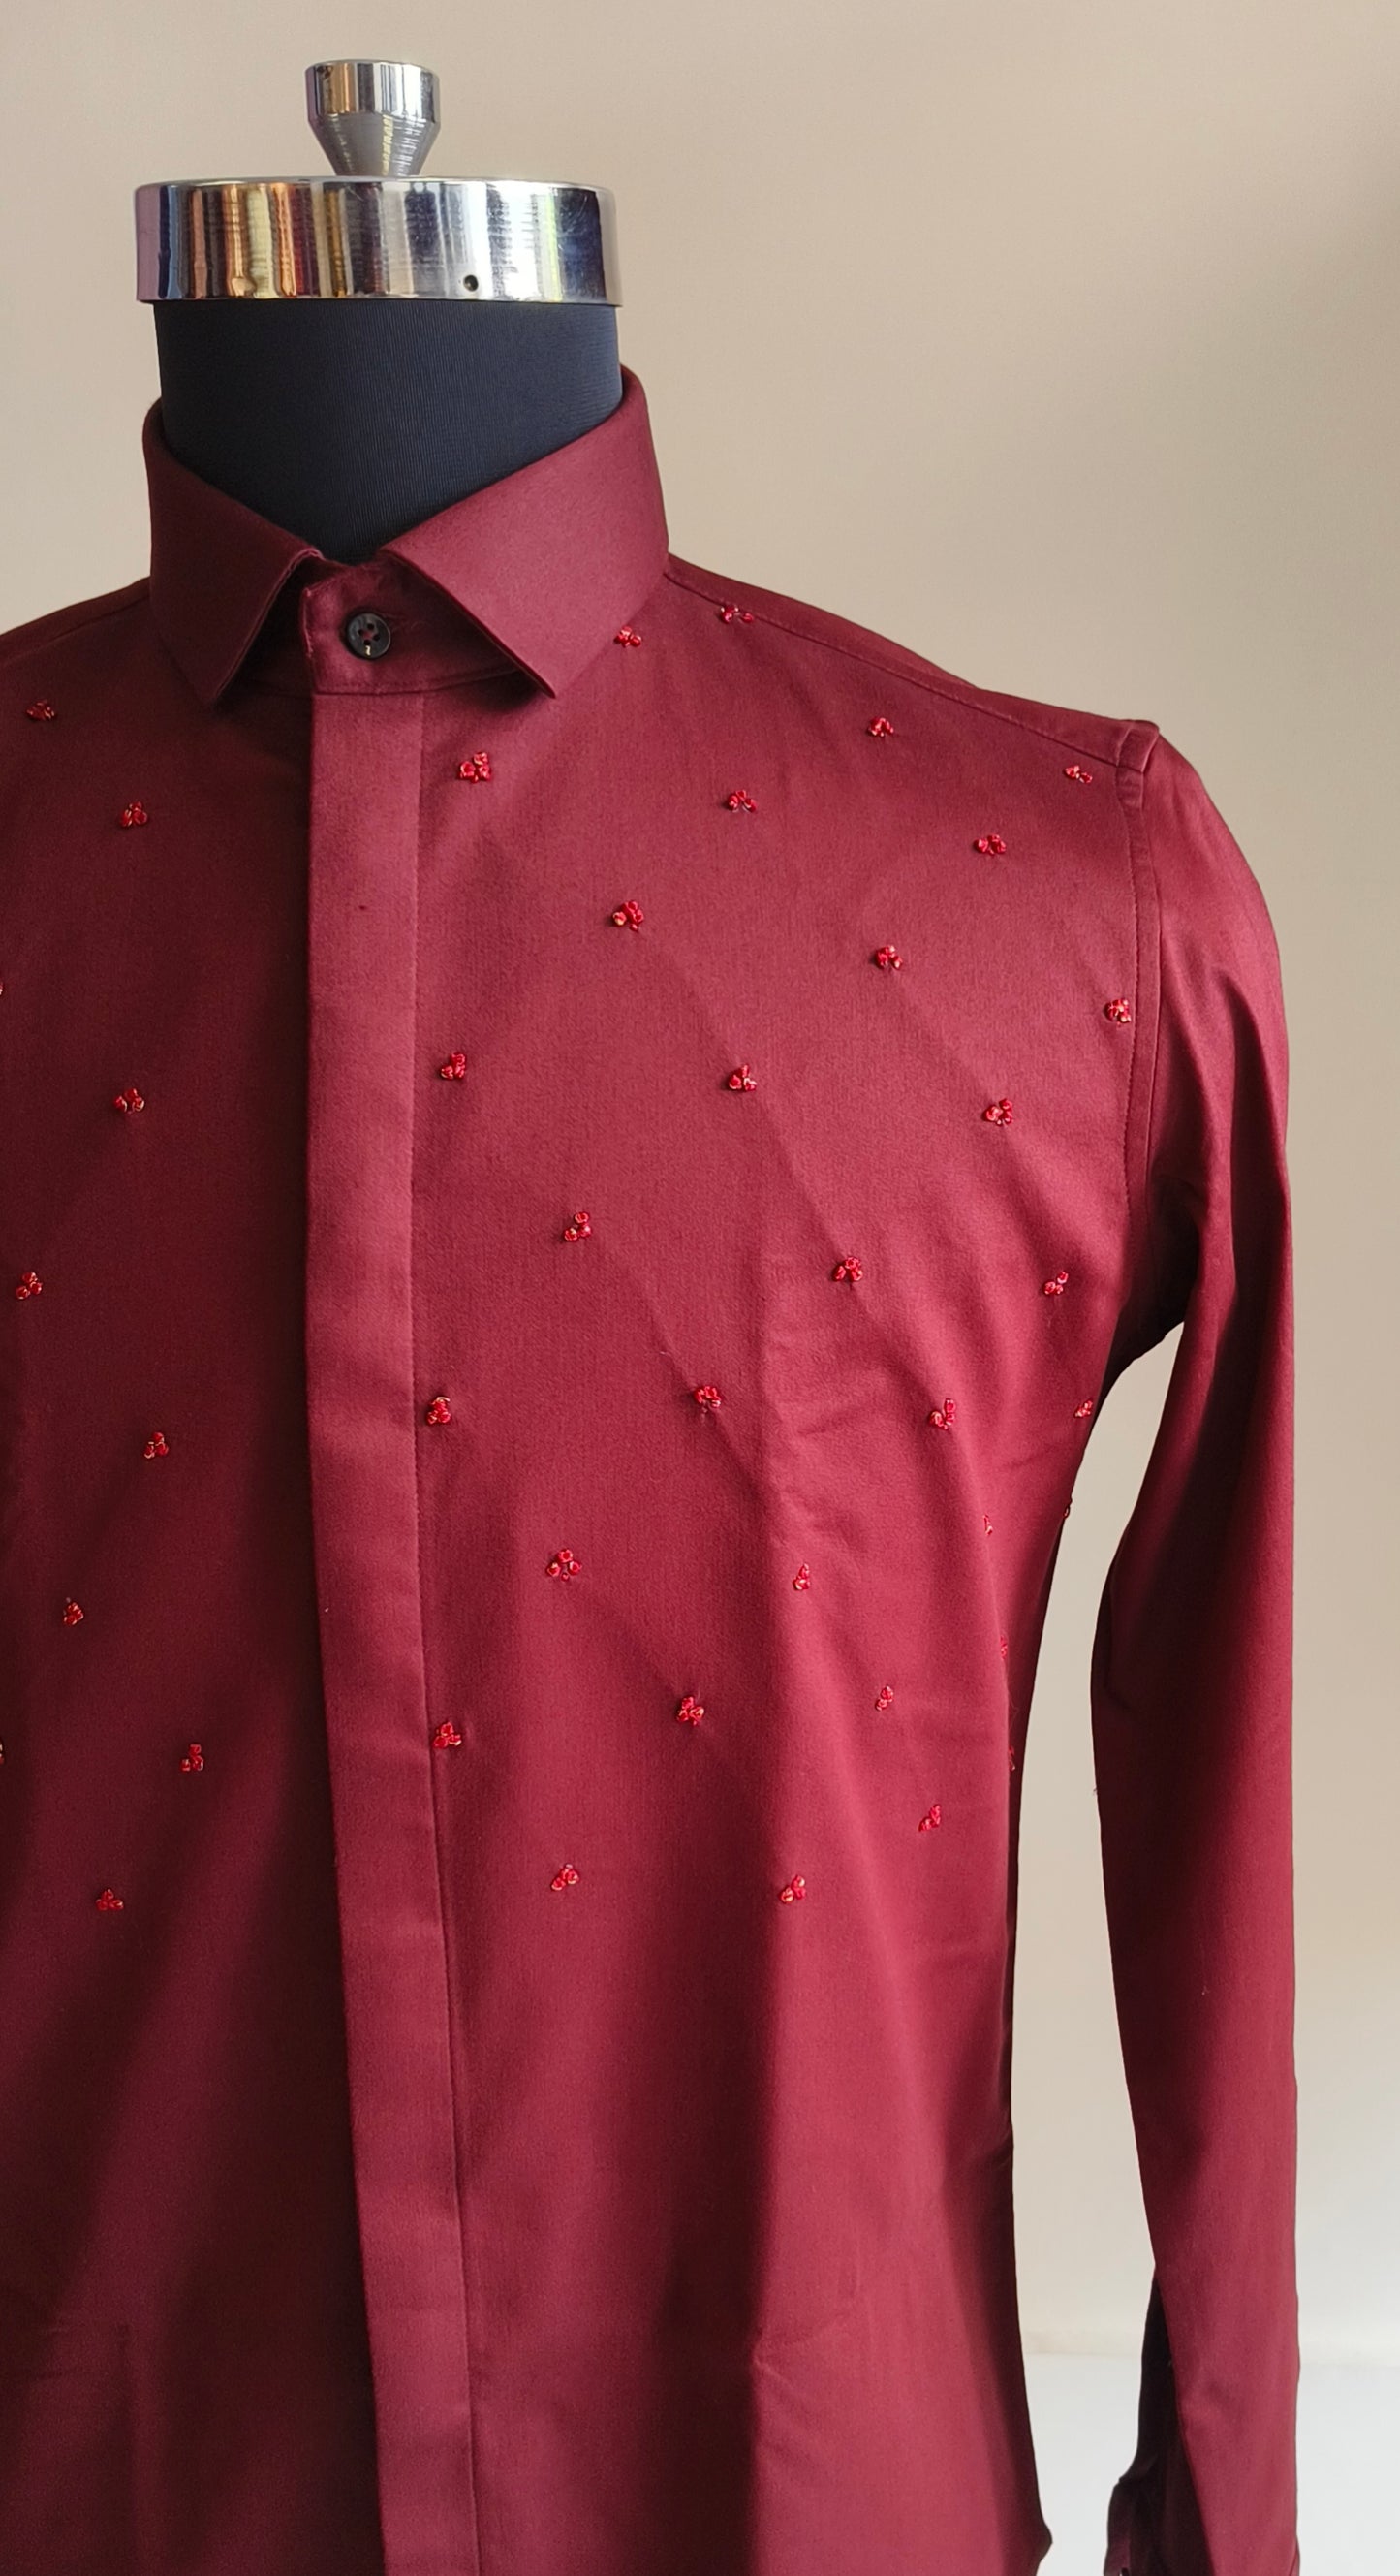 Cherry Embroidery Shirt